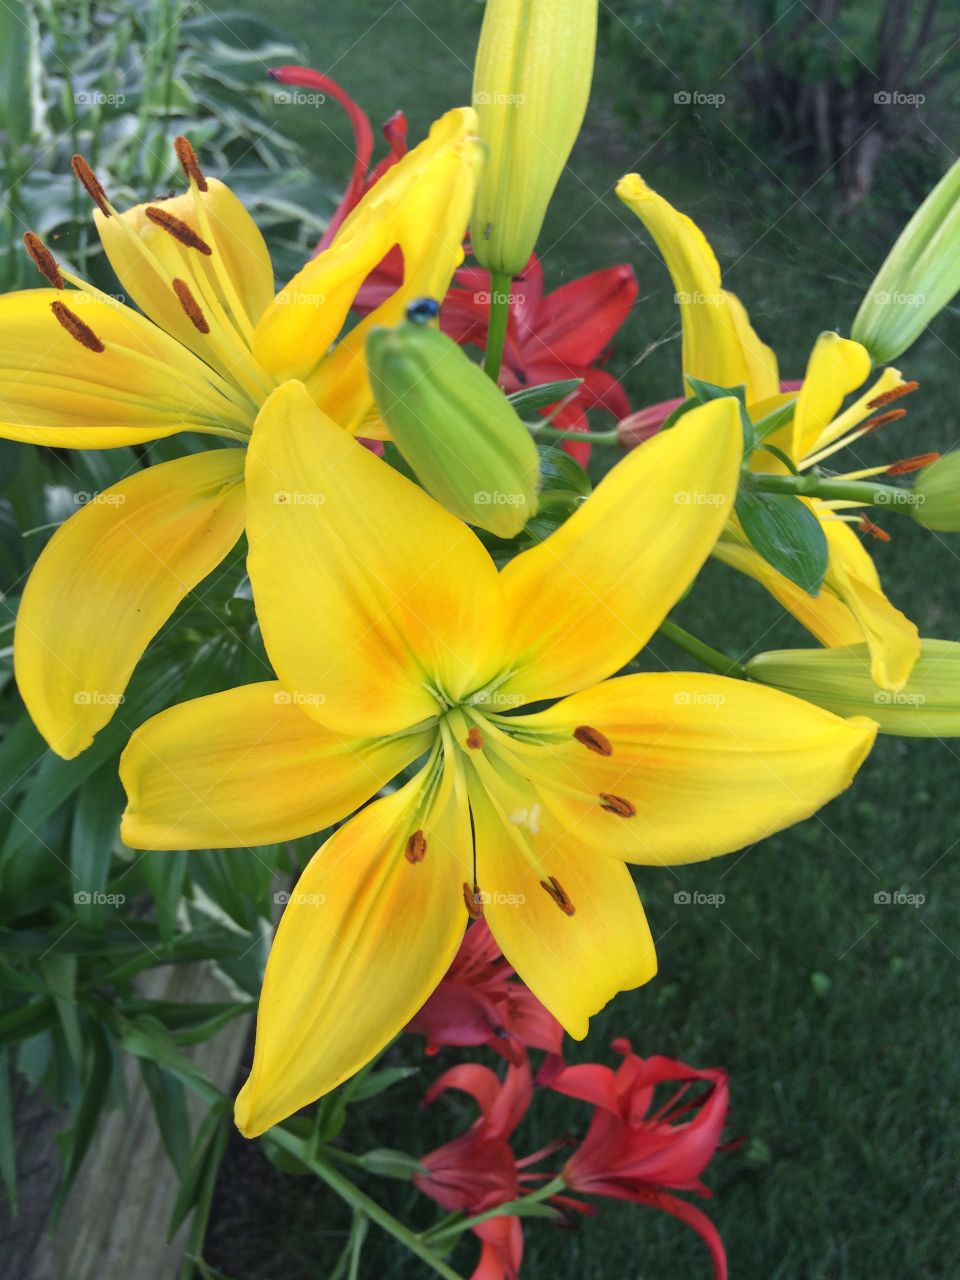 Yellow lily in the plant bed with red ones behind it